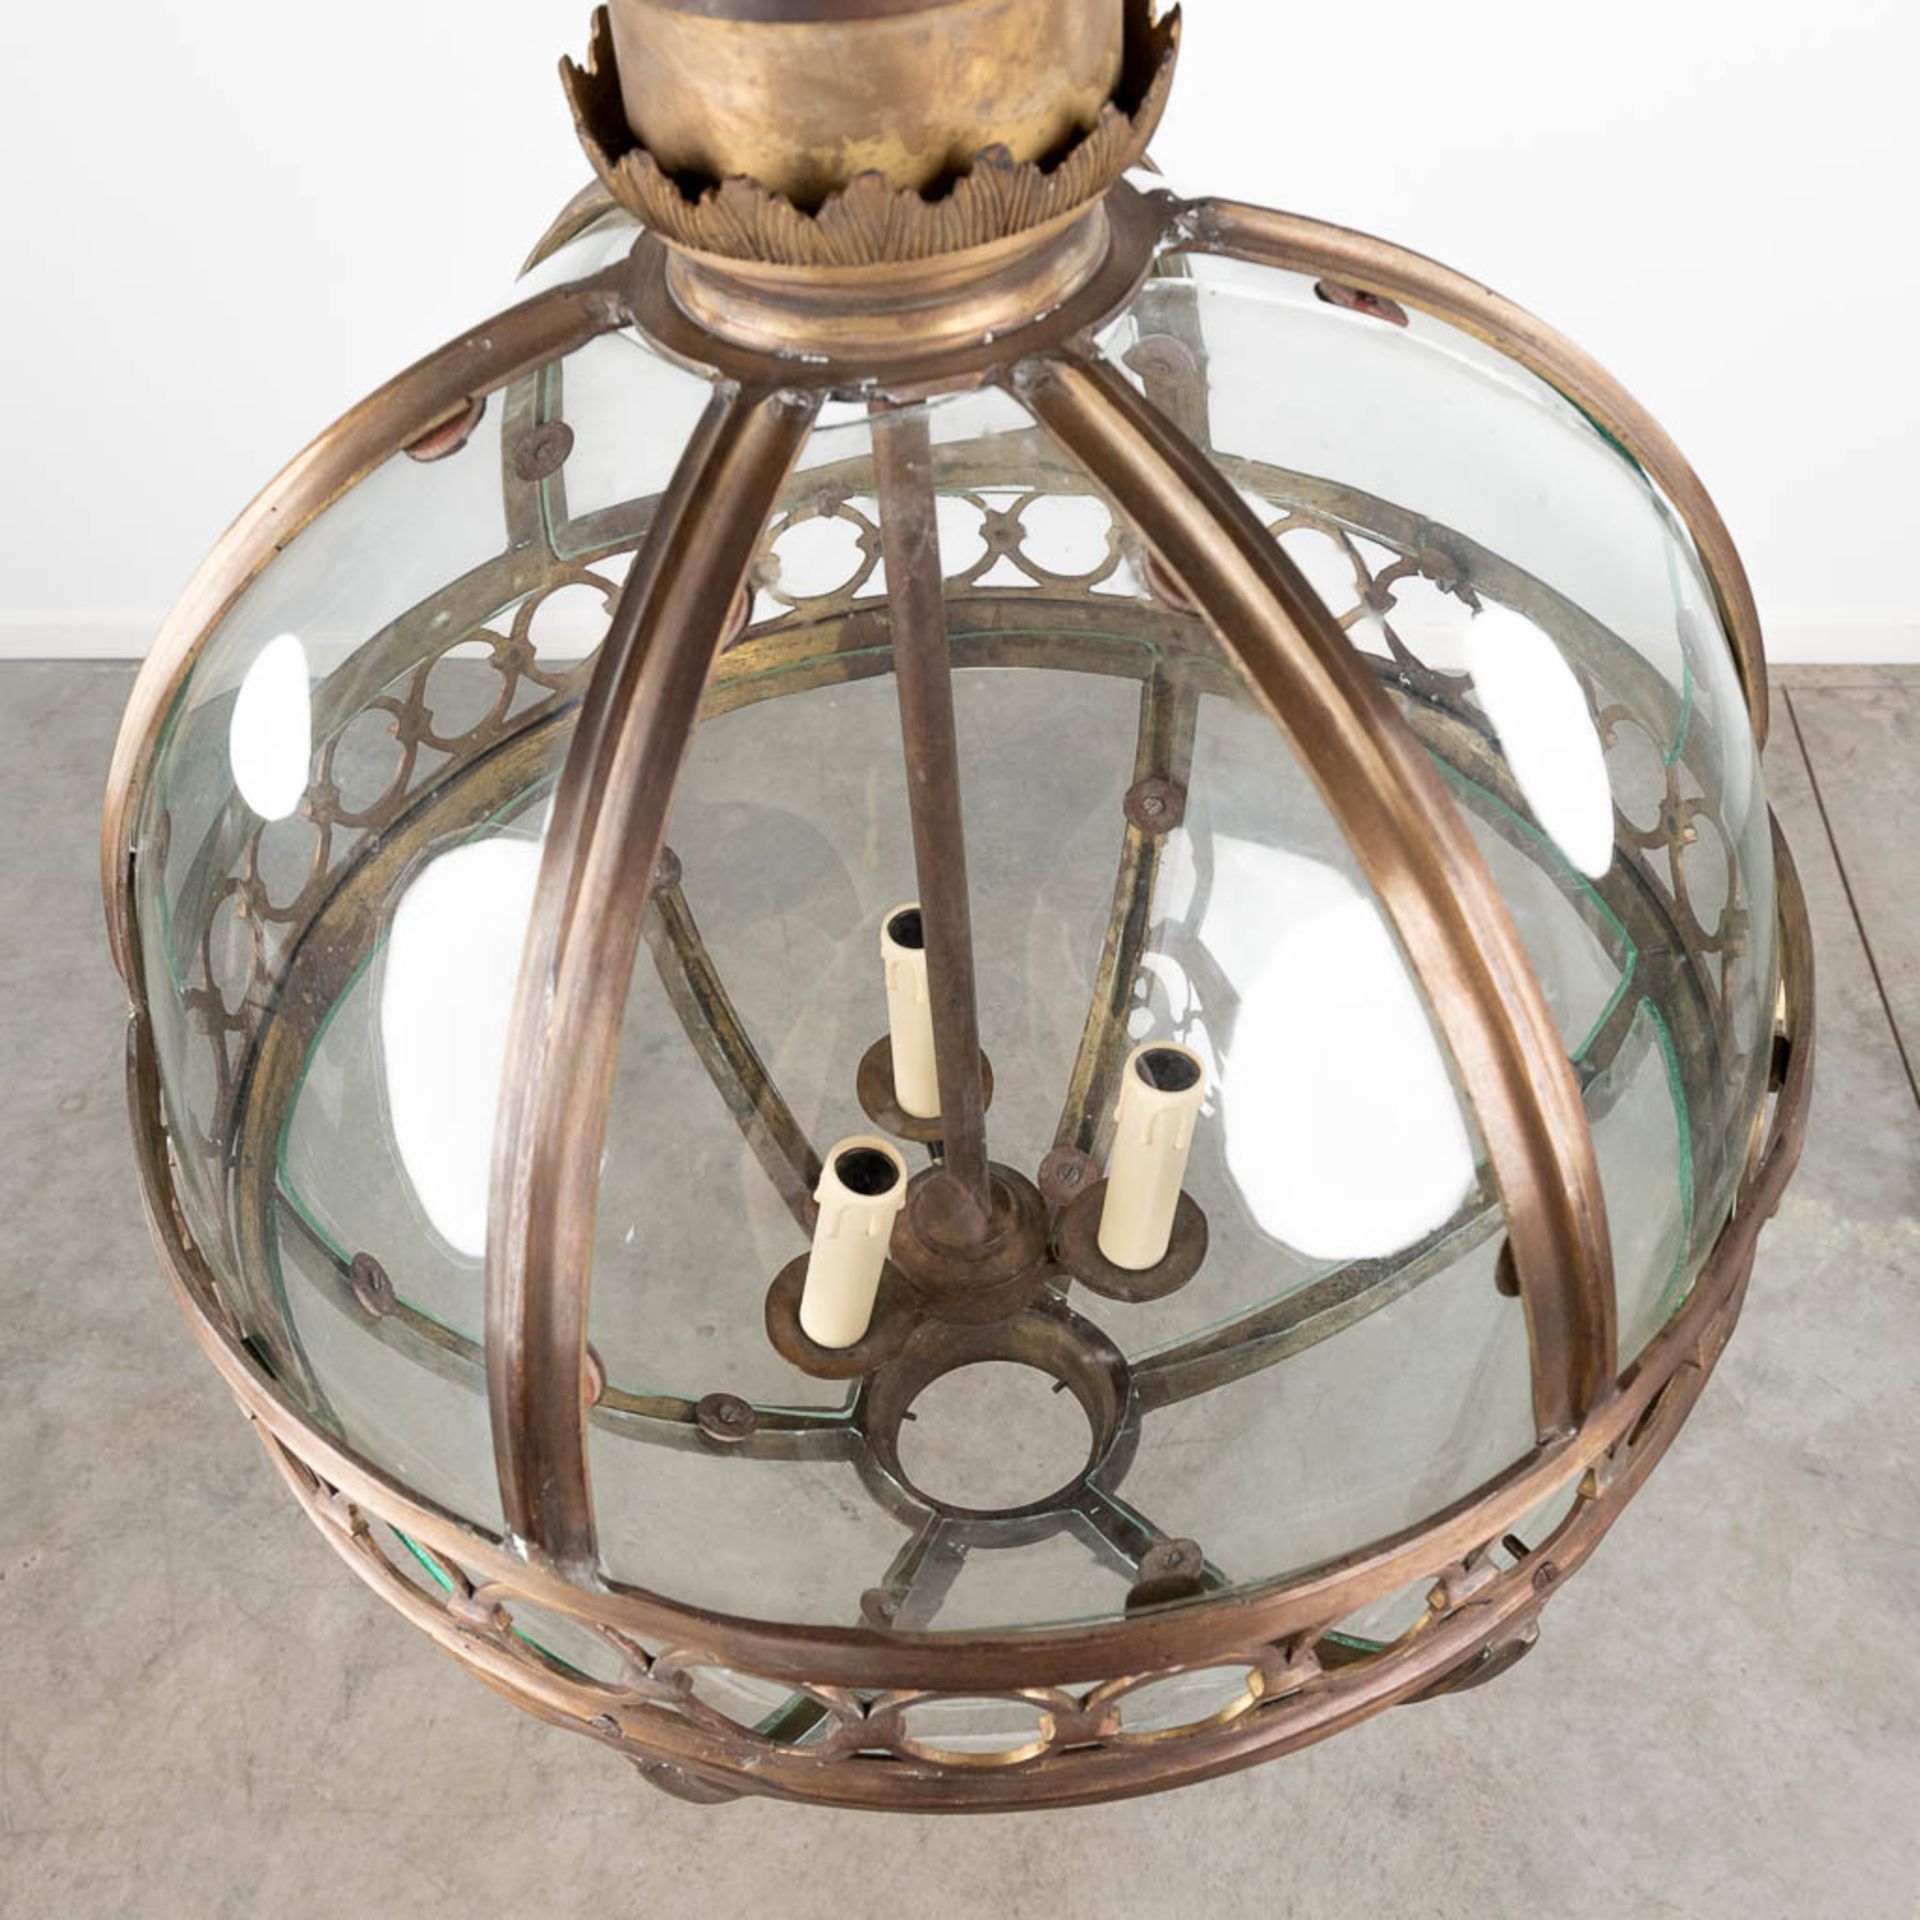 A lantern in the shape of a ball, made of glass and brass. 20th C. (H:70 x D:56 cm) - Image 9 of 12